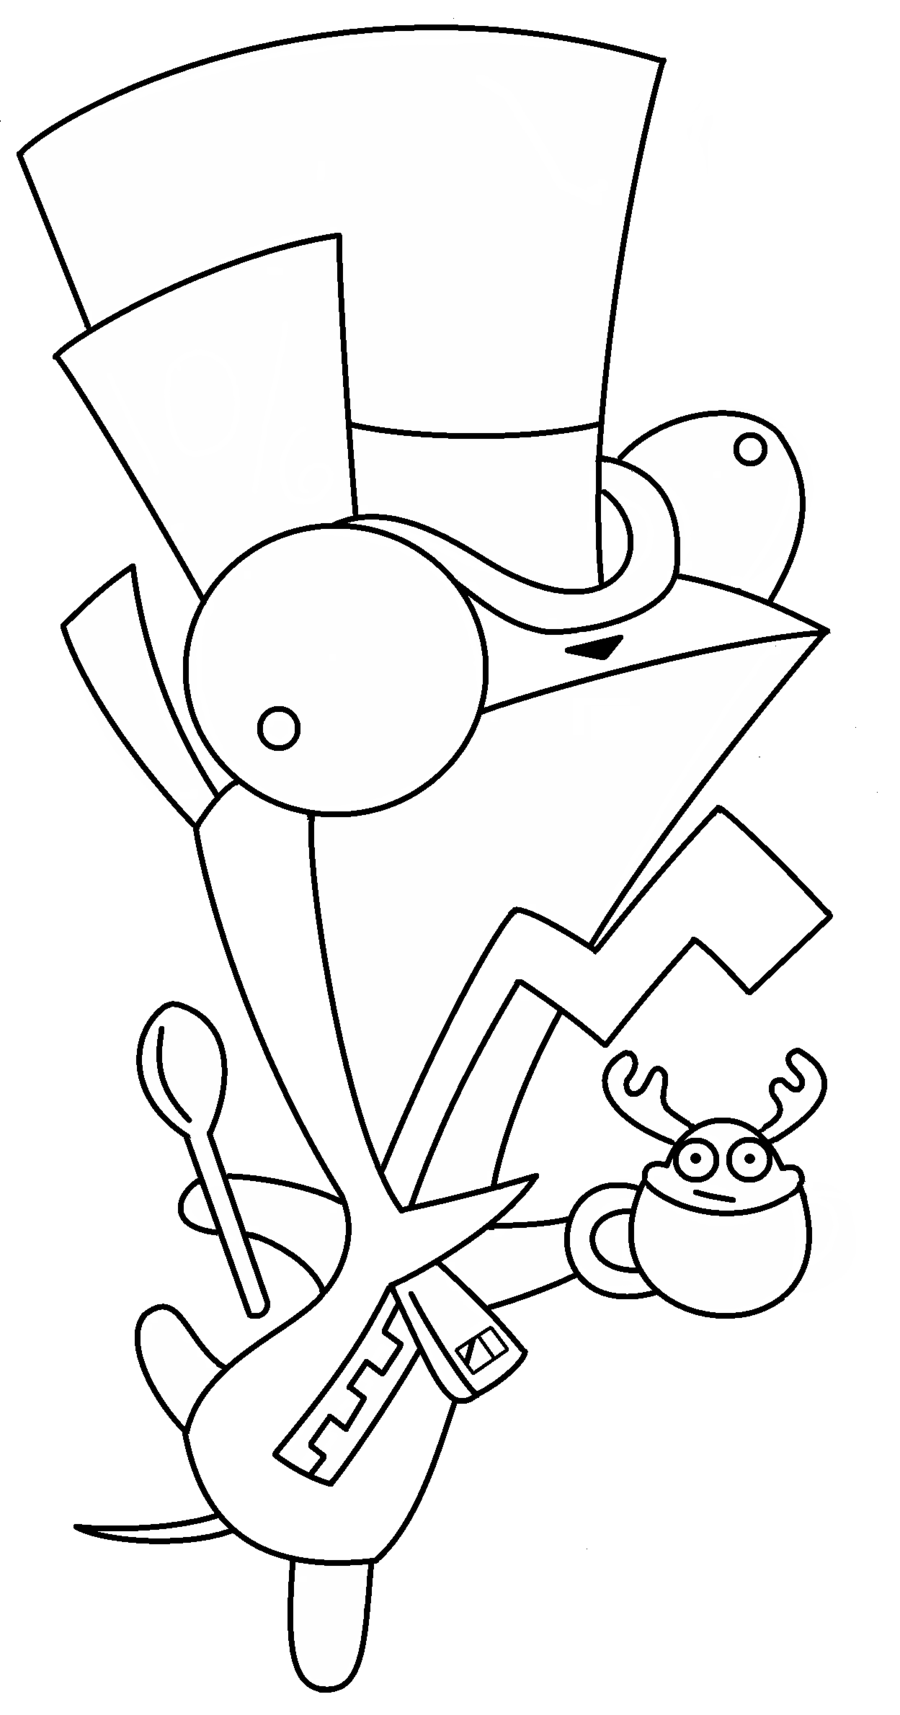 Mad Hatter GIR Coloring Page by MEWtube3000 on DeviantArt